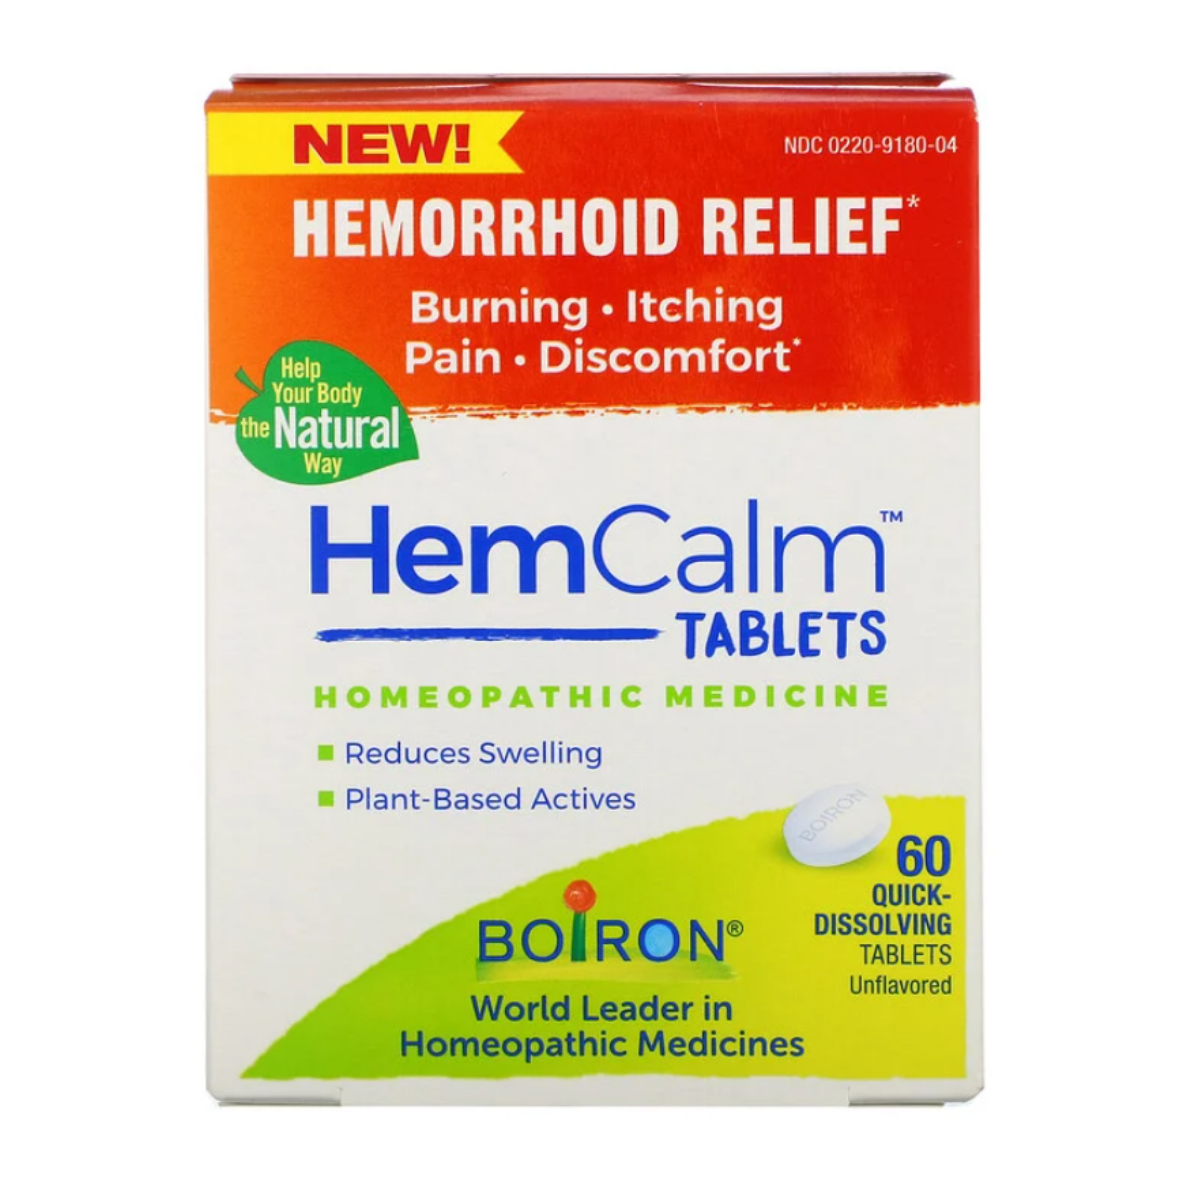 Primary image of Hemorrhoid Tablets